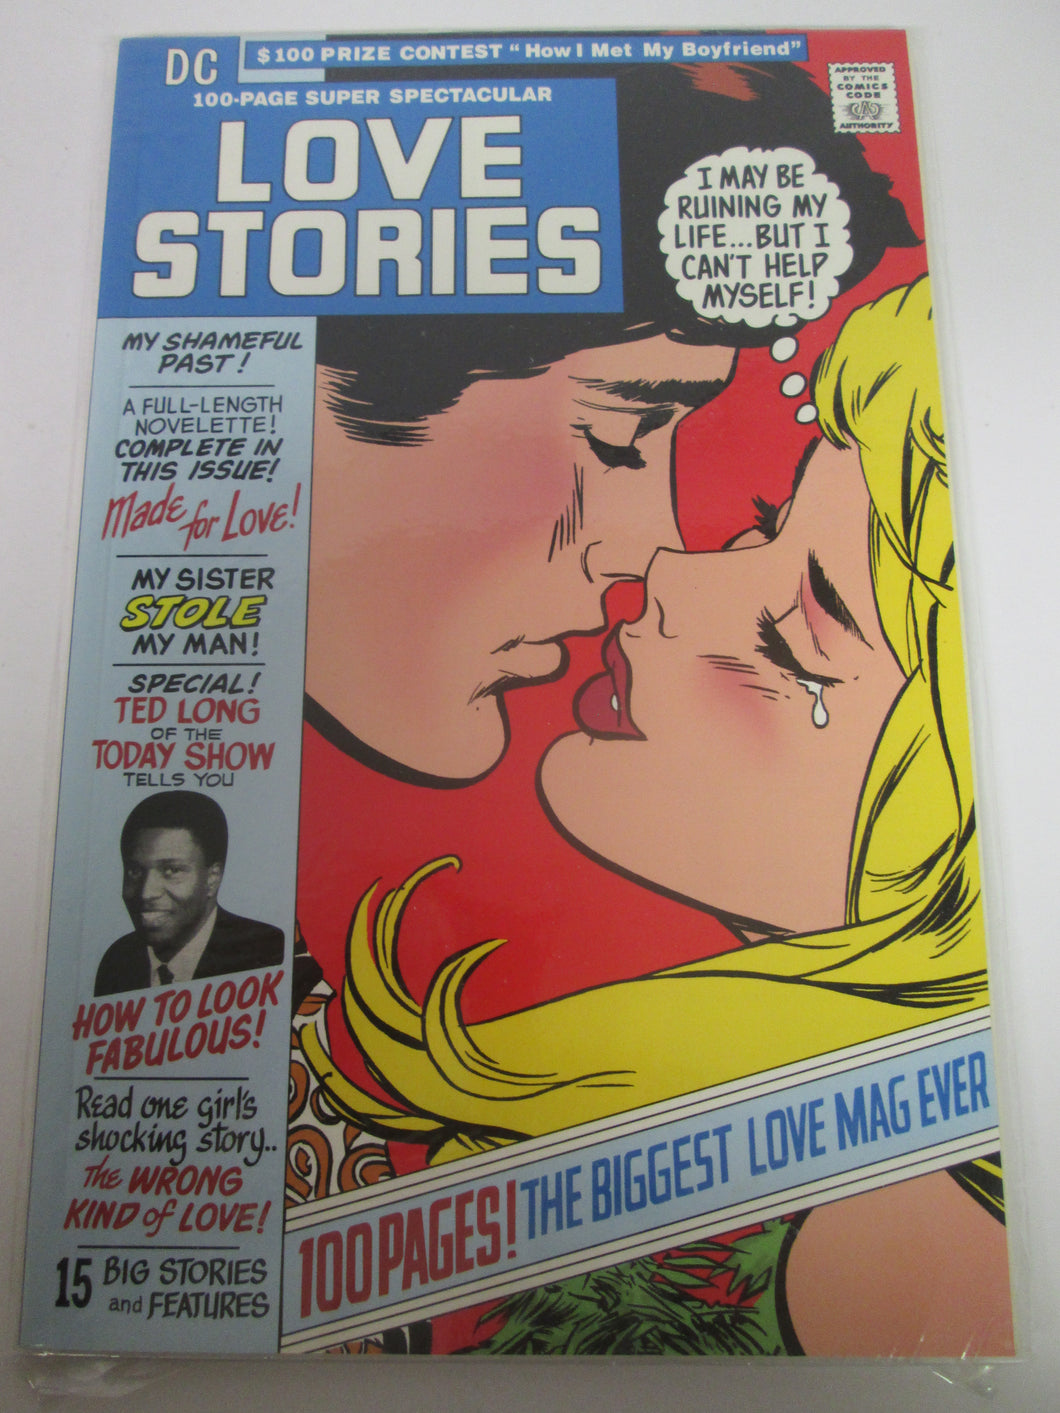 Love Stories DC 100 Page Spectacular GN reprints Love Stories #5 PB